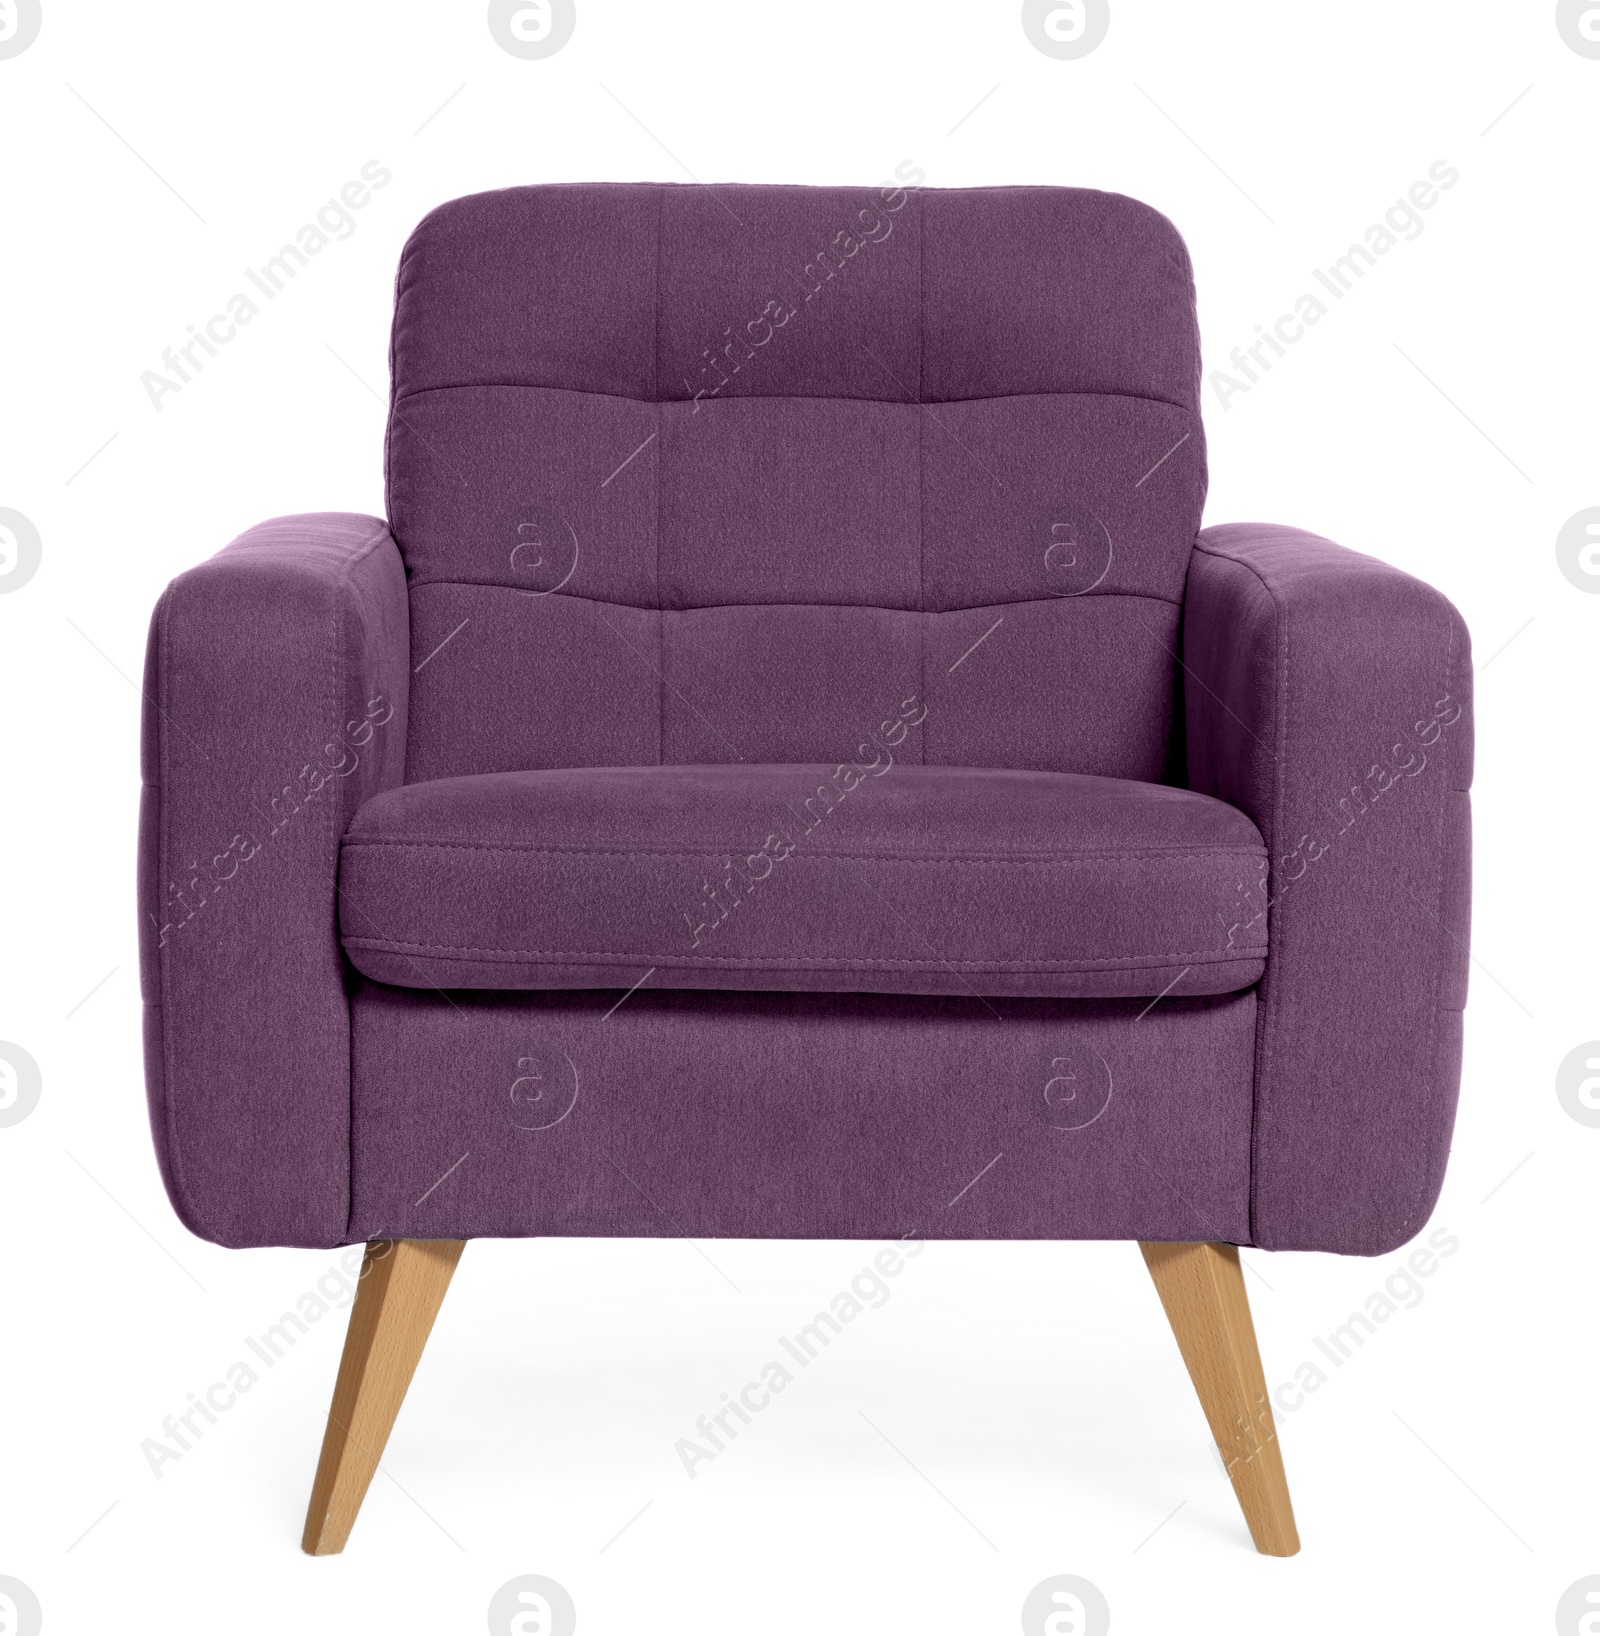 Image of One comfortable purple armchair isolated on white